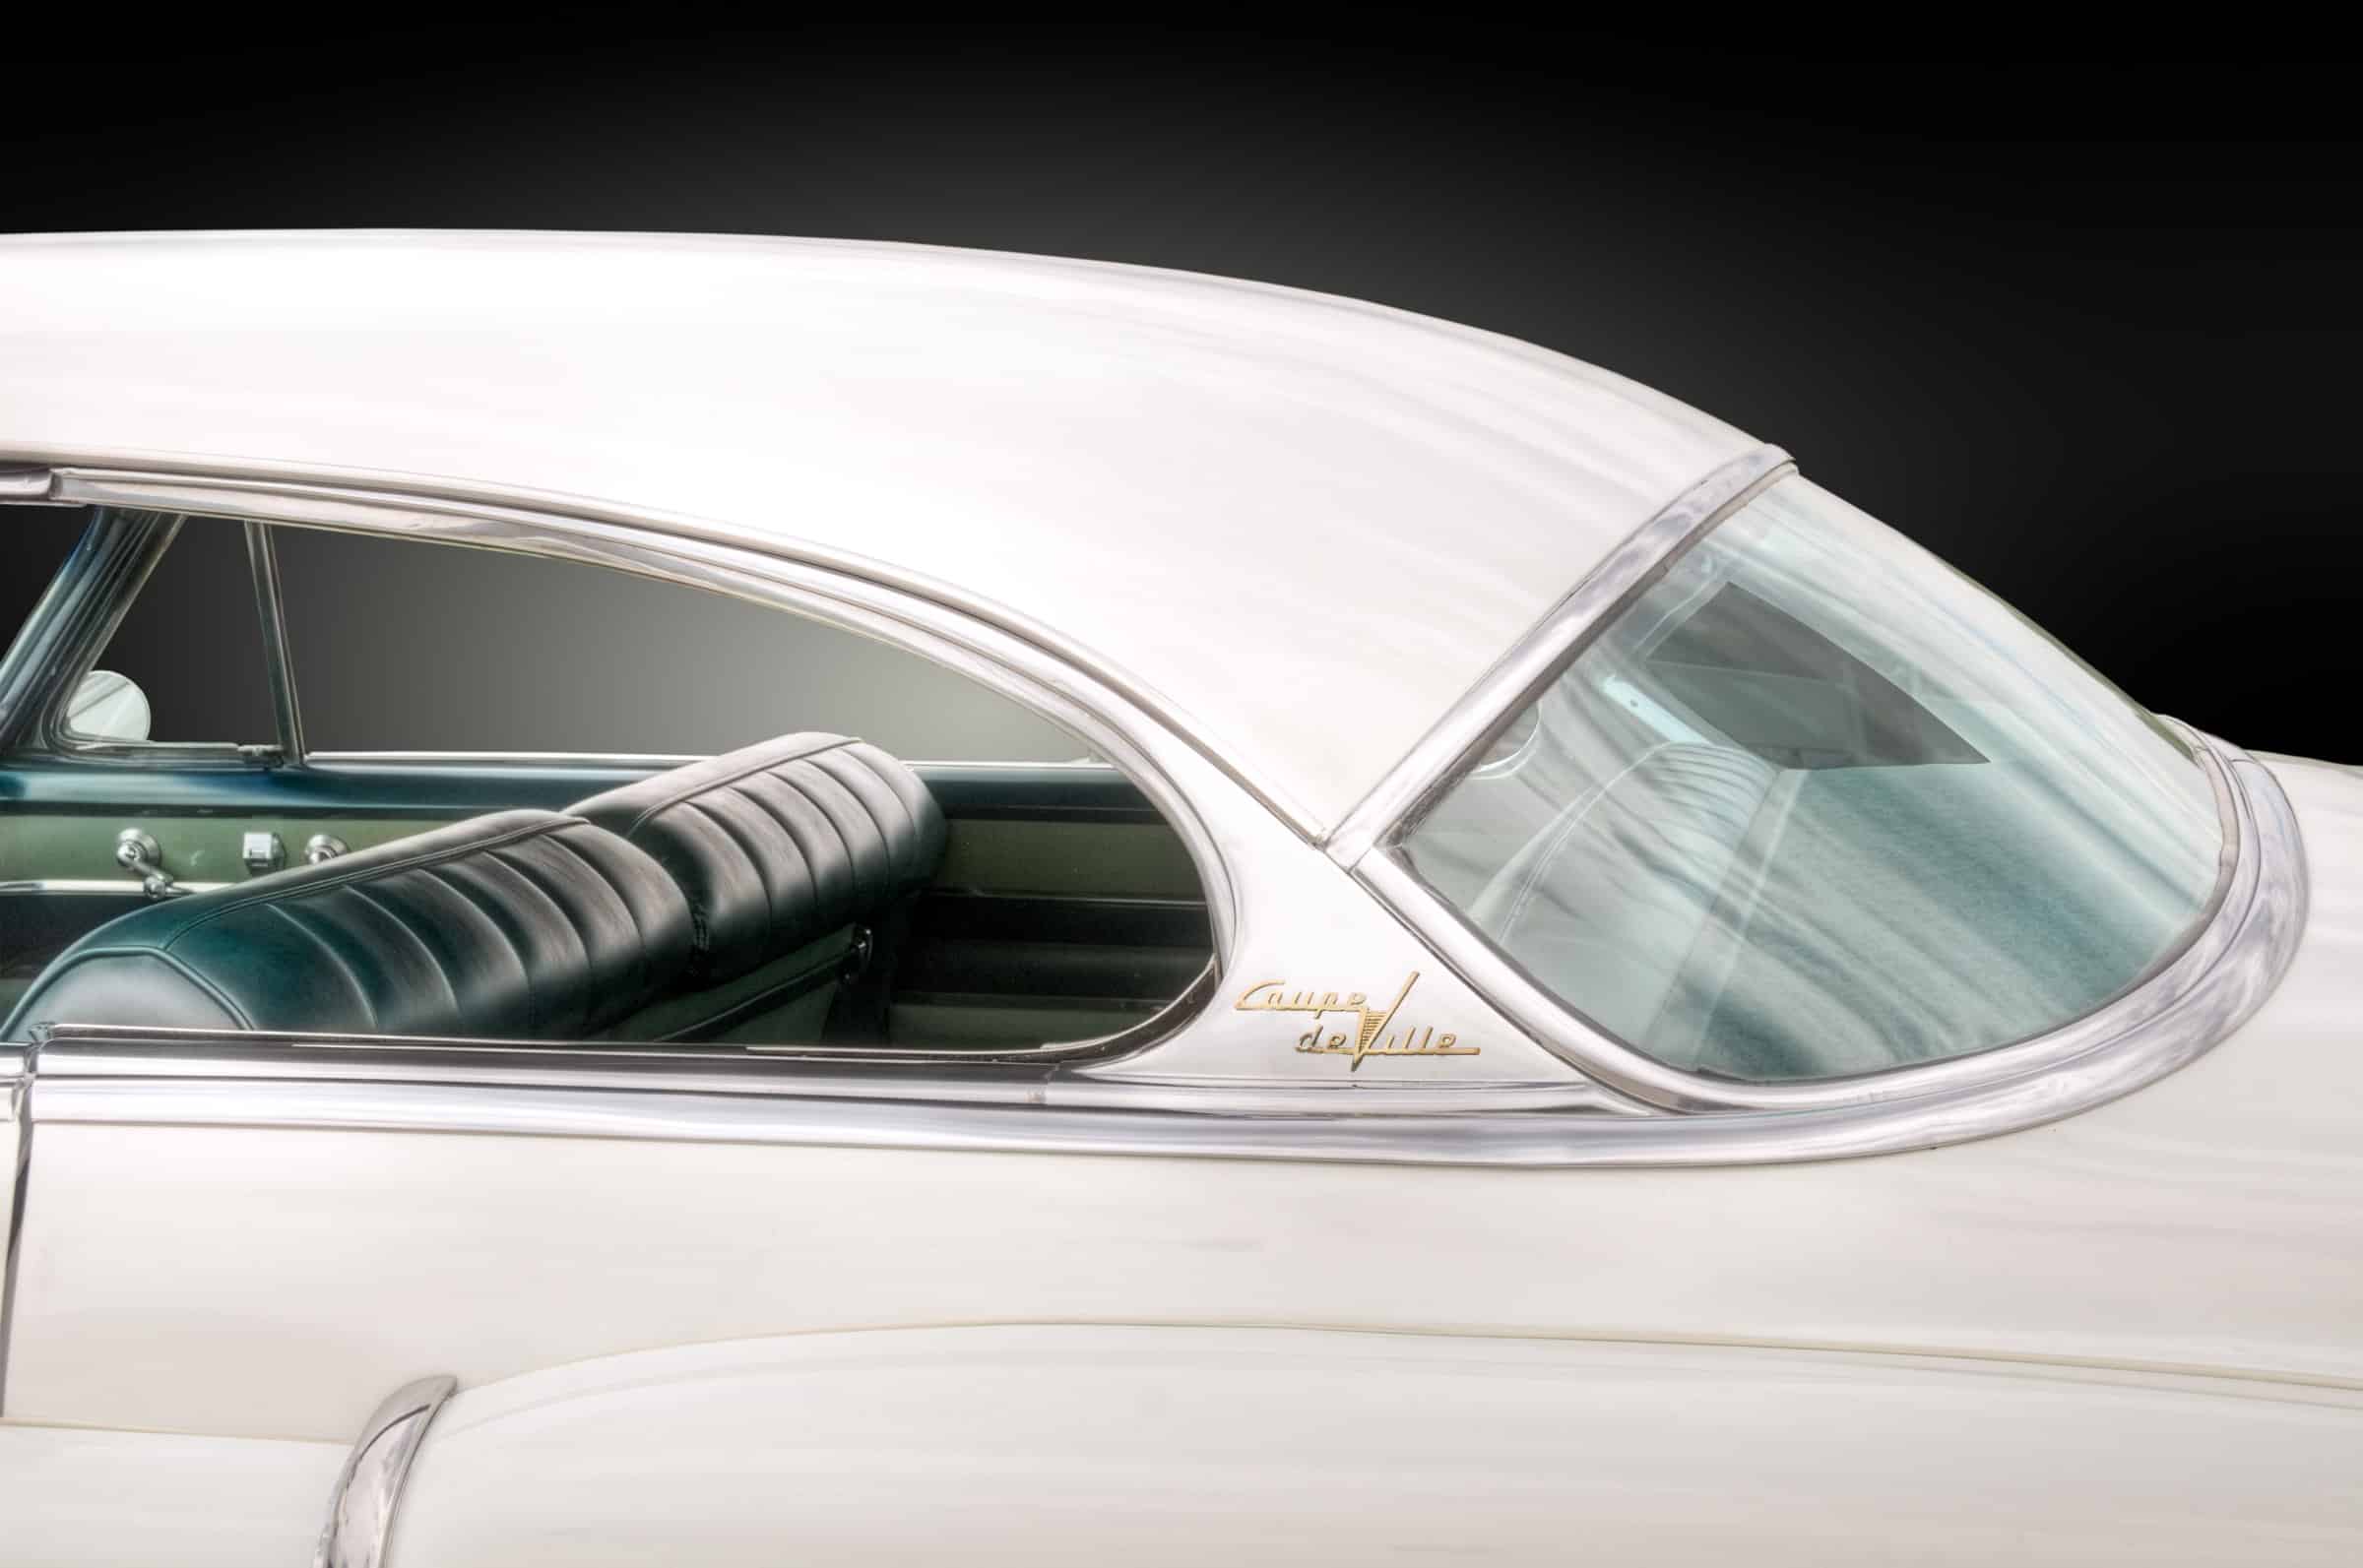 1953 Cadillac Coupe deVille - Close-up of roof and rear window.